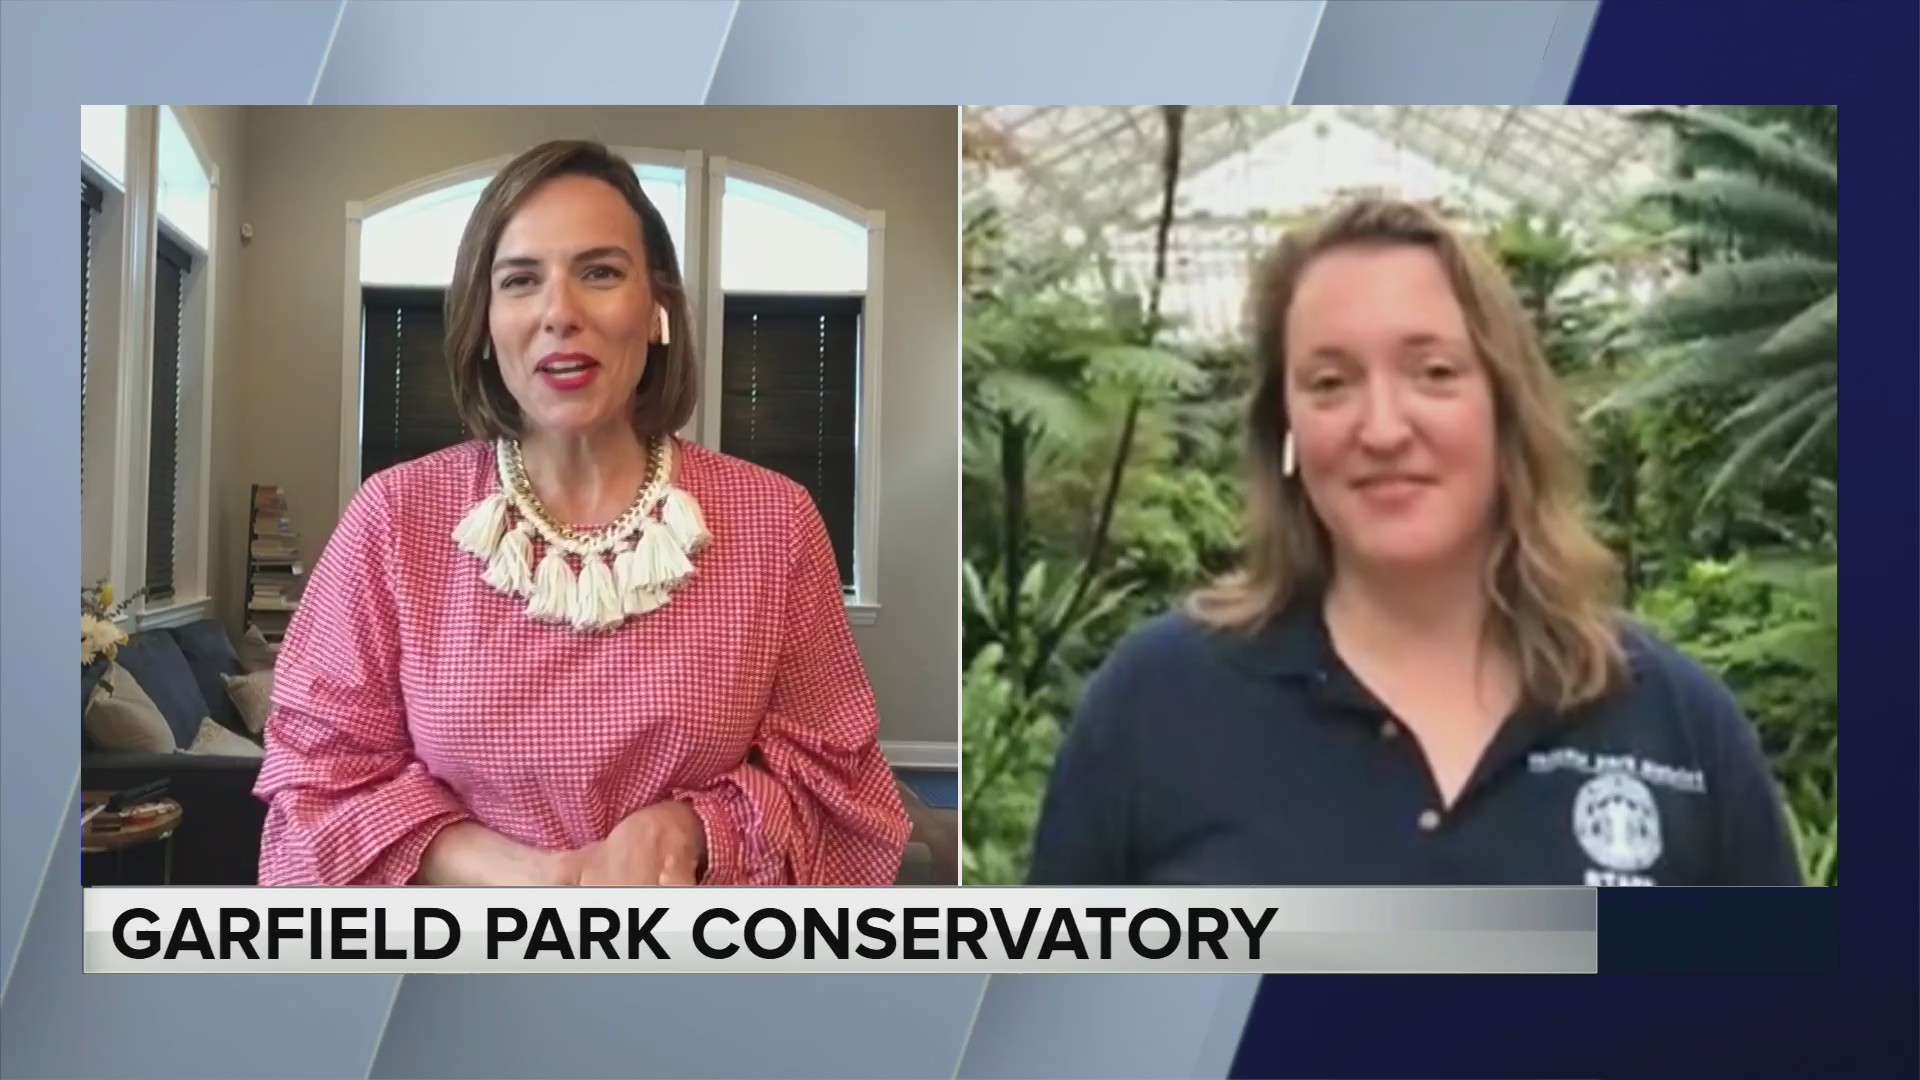 Around ‘The House’ checks in with Garfield Park Conservatory